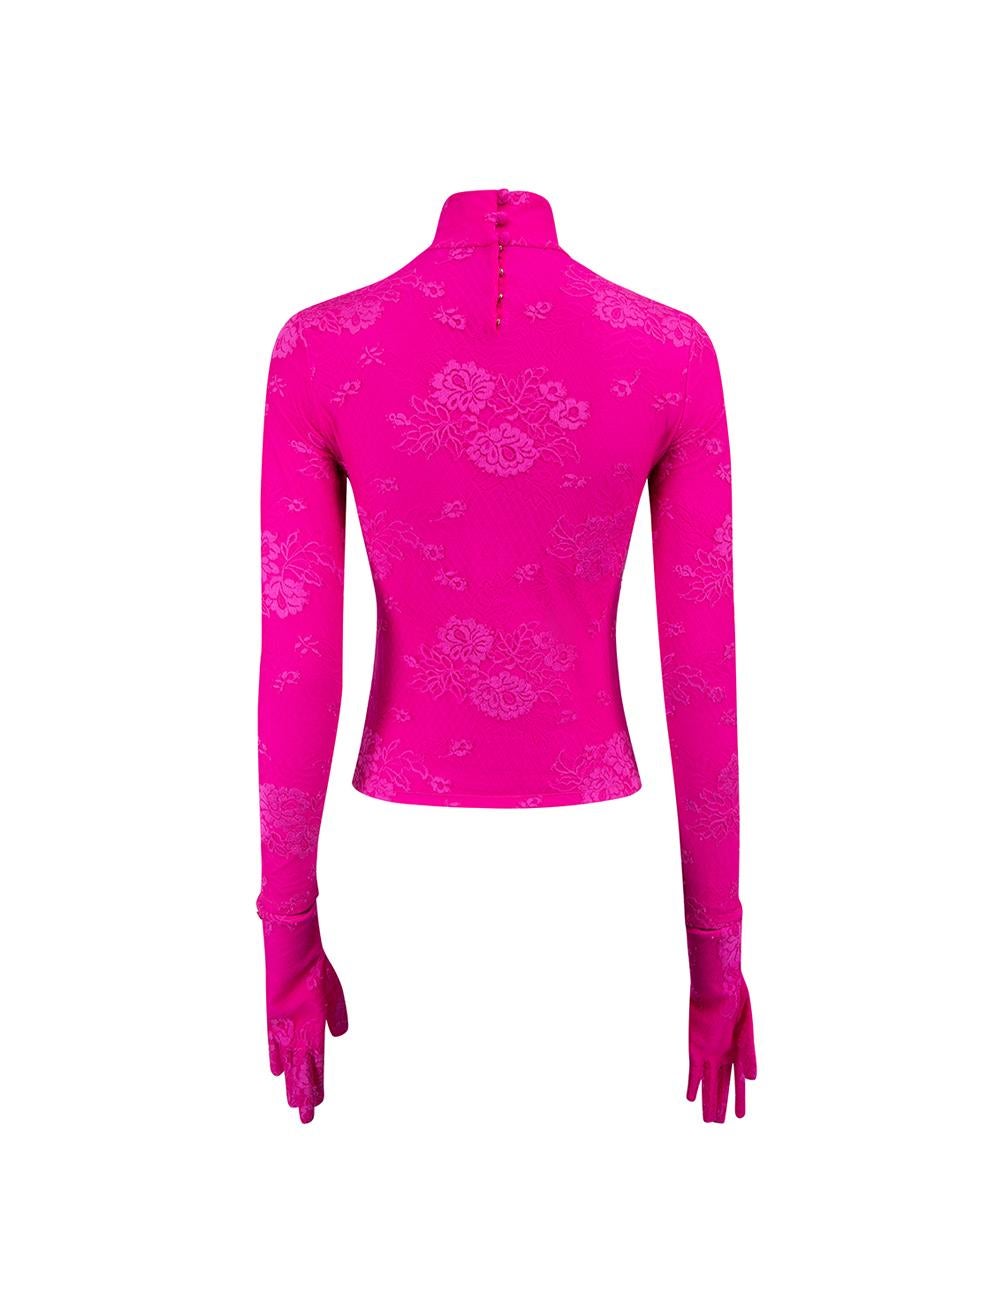 Hot Pink Lace Removable Gloves Mock Neck Top Size S In Good Condition For Sale In London, GB